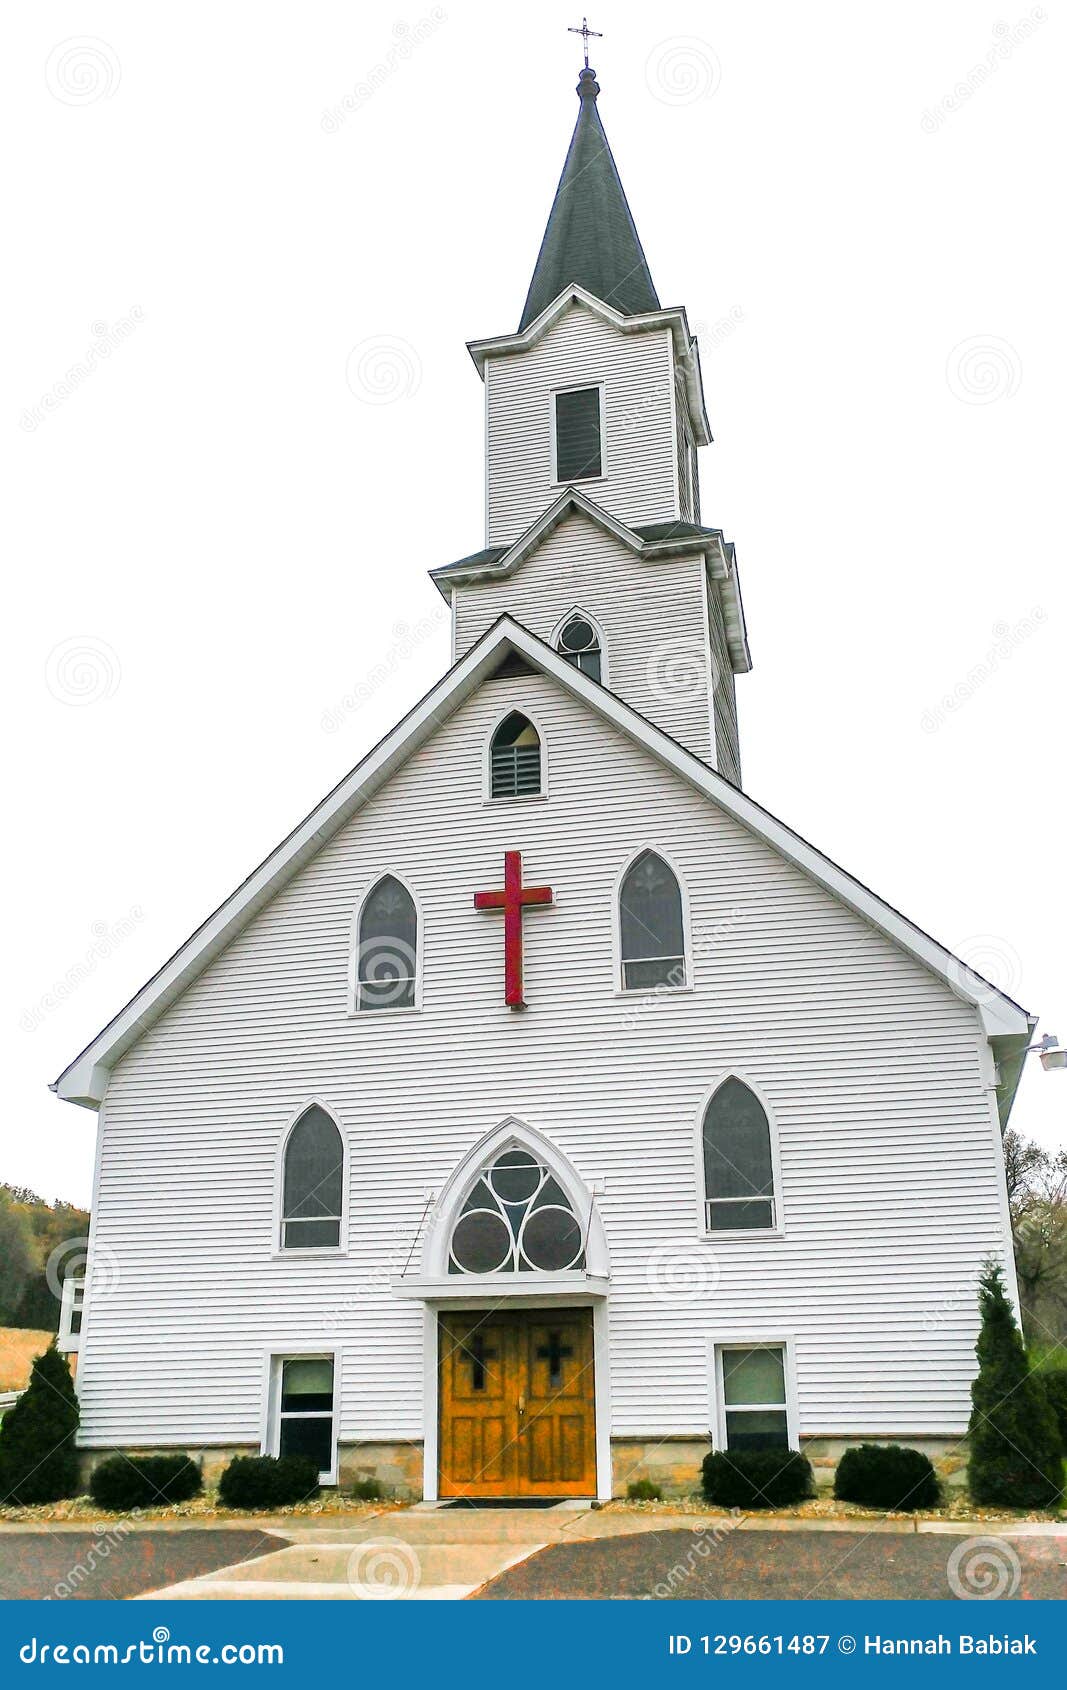 Premium Photo  Small church belfry white color chapel roof on